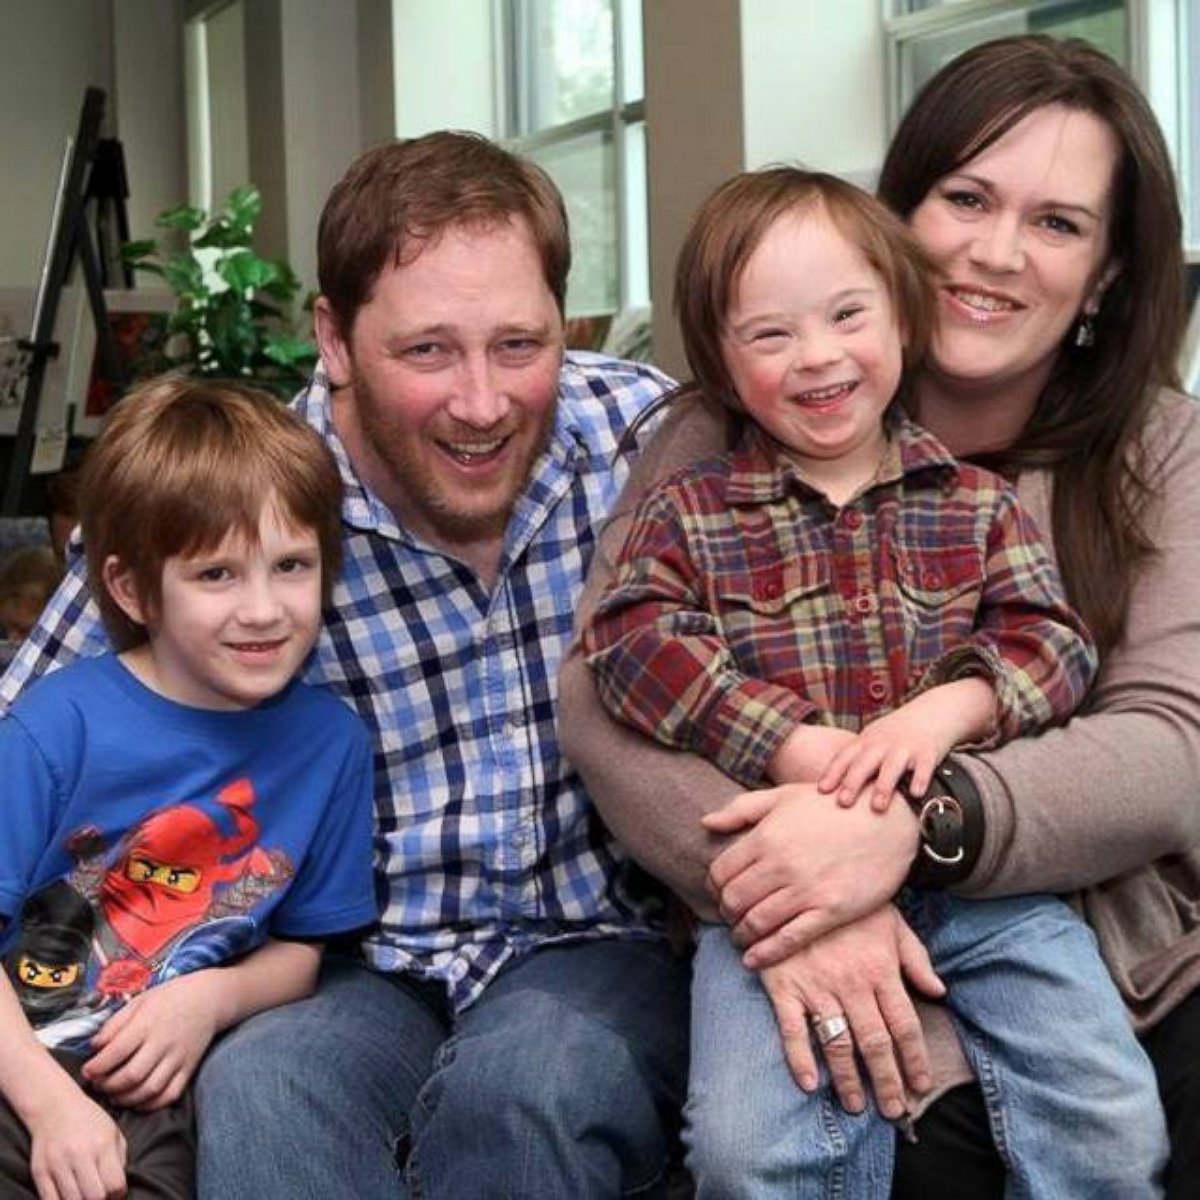 PHOTO: Robb Scott photographed with his wife, Kelly MacIntosh-Scott, and their sons Griffin,7, and Turner, 5.